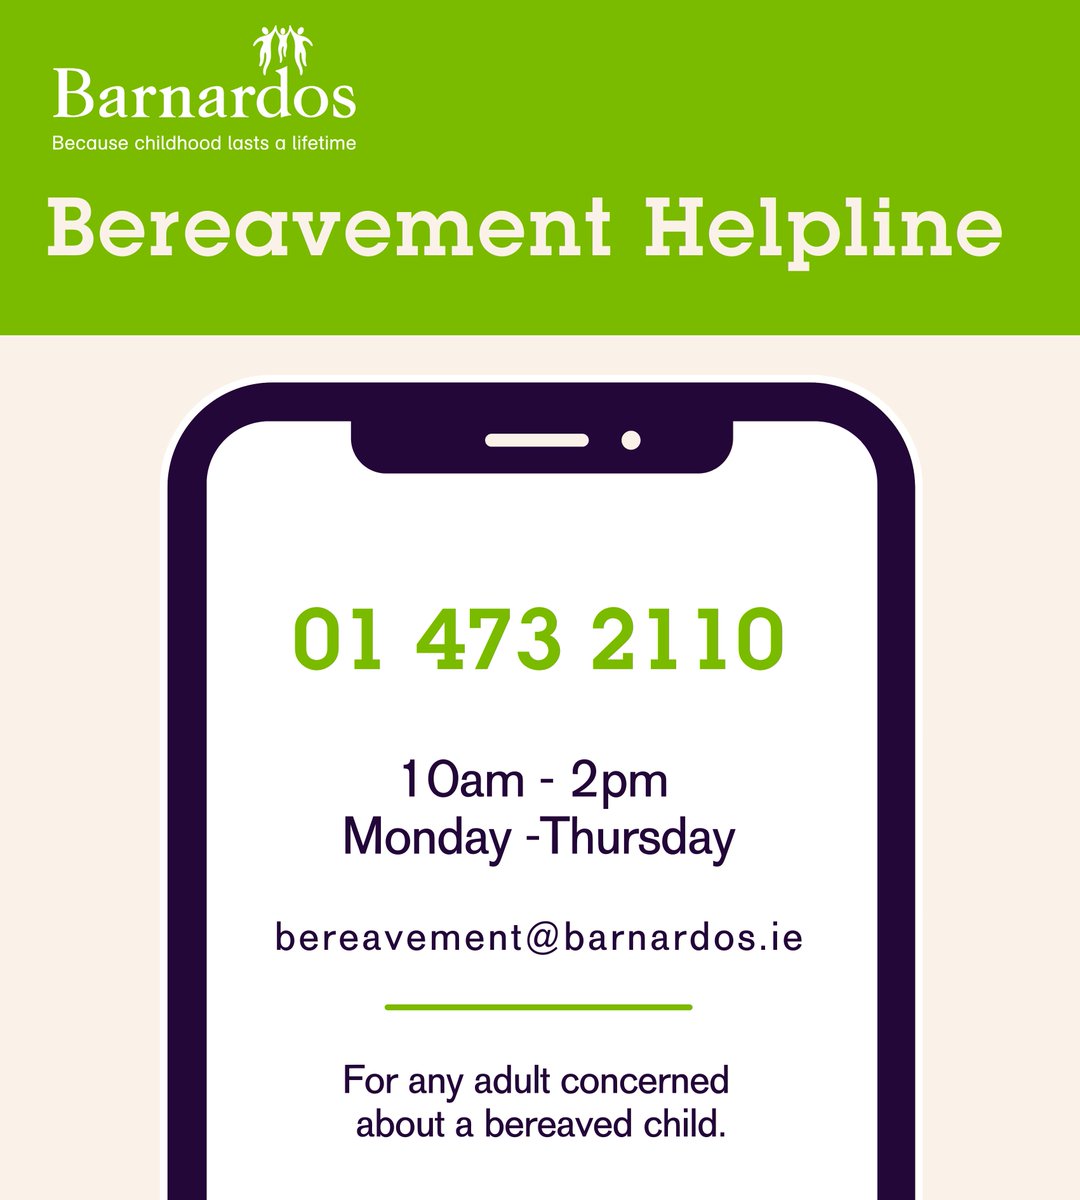 At this very difficult time for children and families in the #Tallaght community and across the country Barnardos Bereavement Helpline is open on (01) 473 2110 from 10am-2pm this week Monday to Thursday for people seeking information about how to support their children